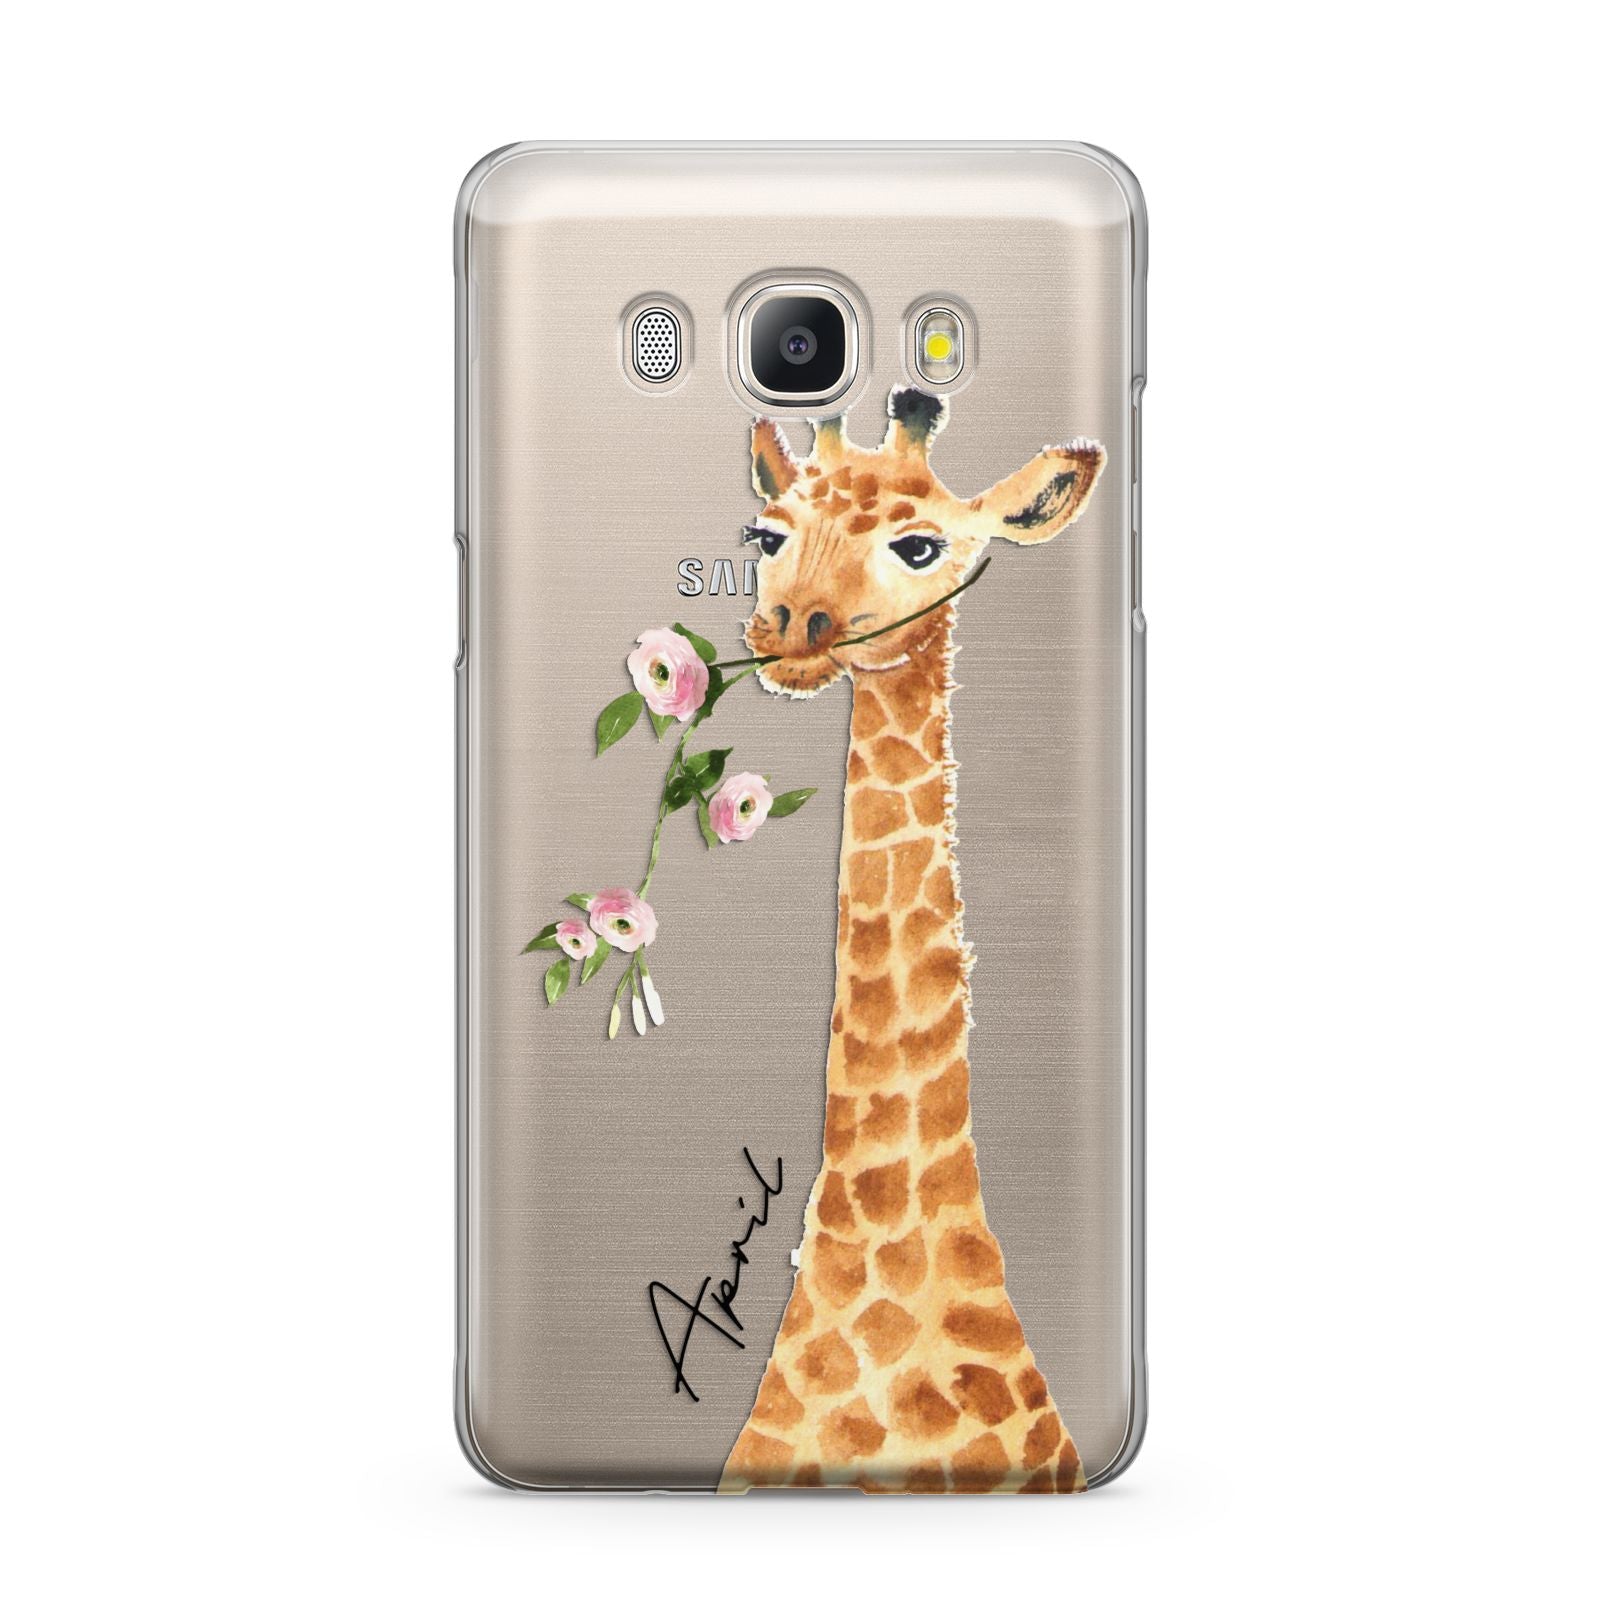 Personalised Giraffe with Name Samsung Galaxy J5 2016 Case